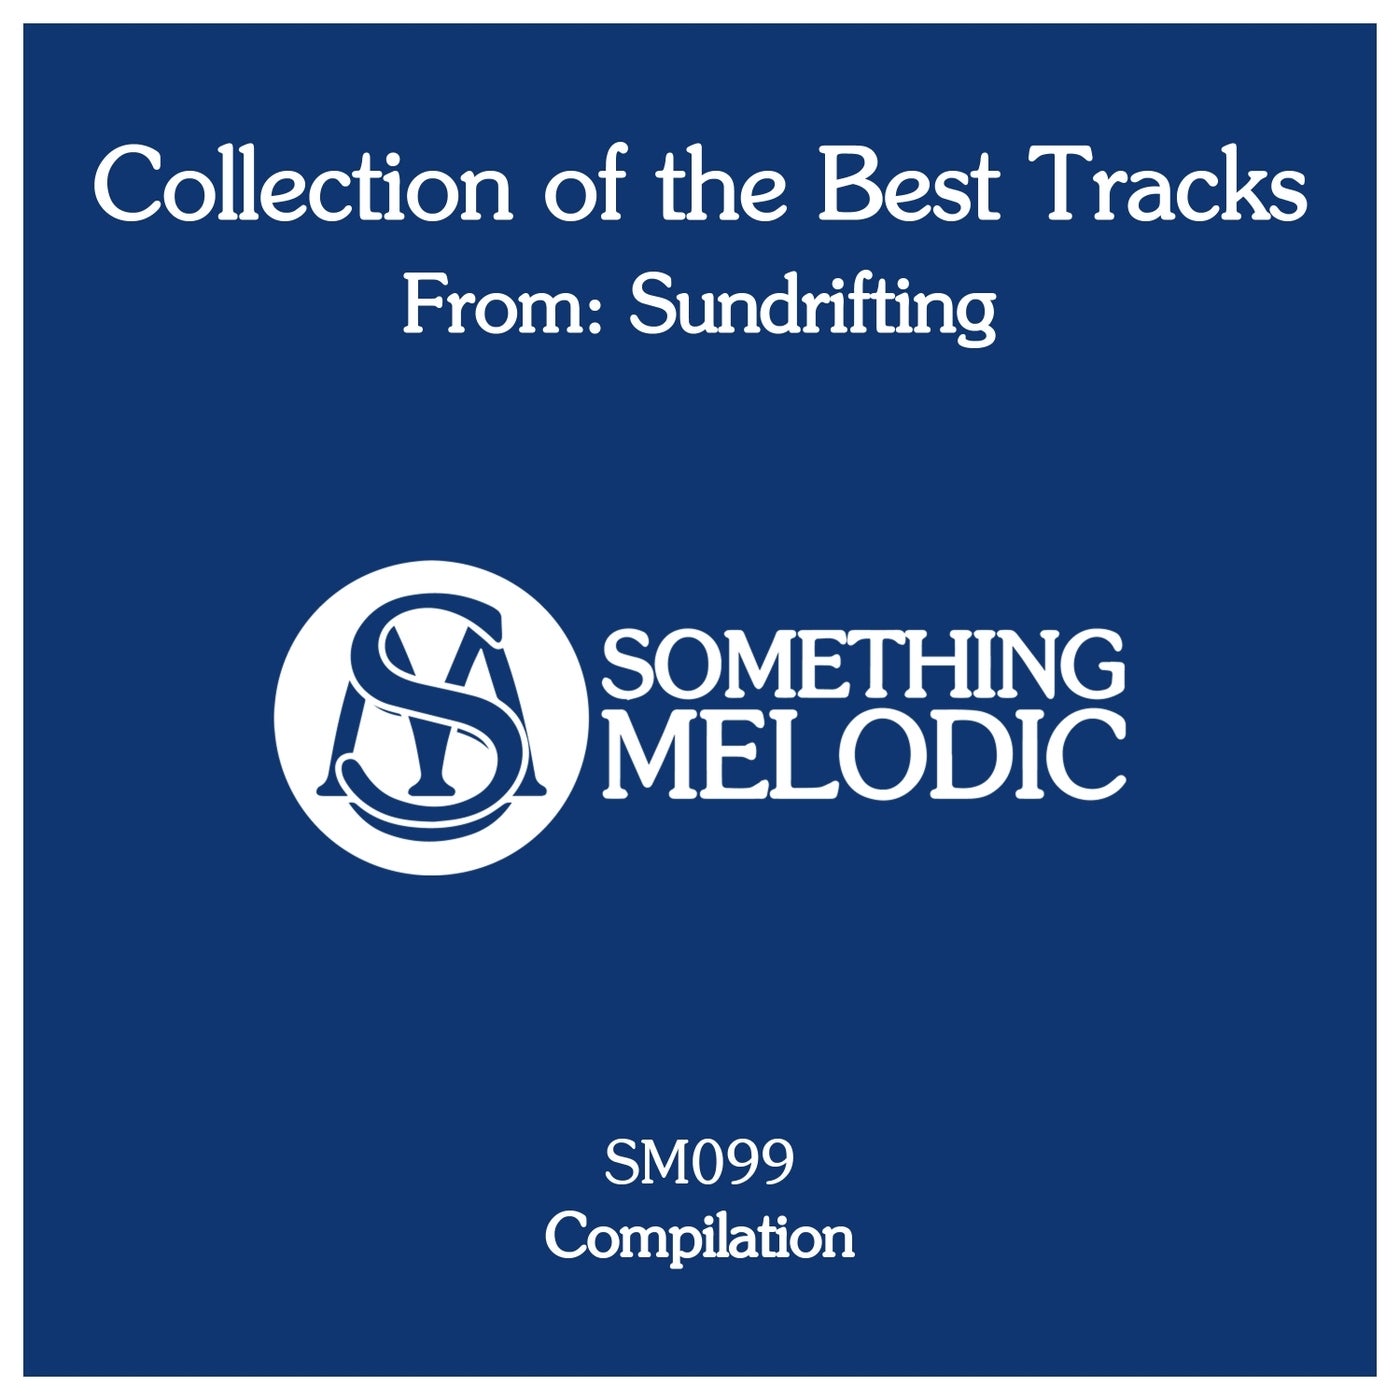 Collection of the Best Tracks From: Sundrifting